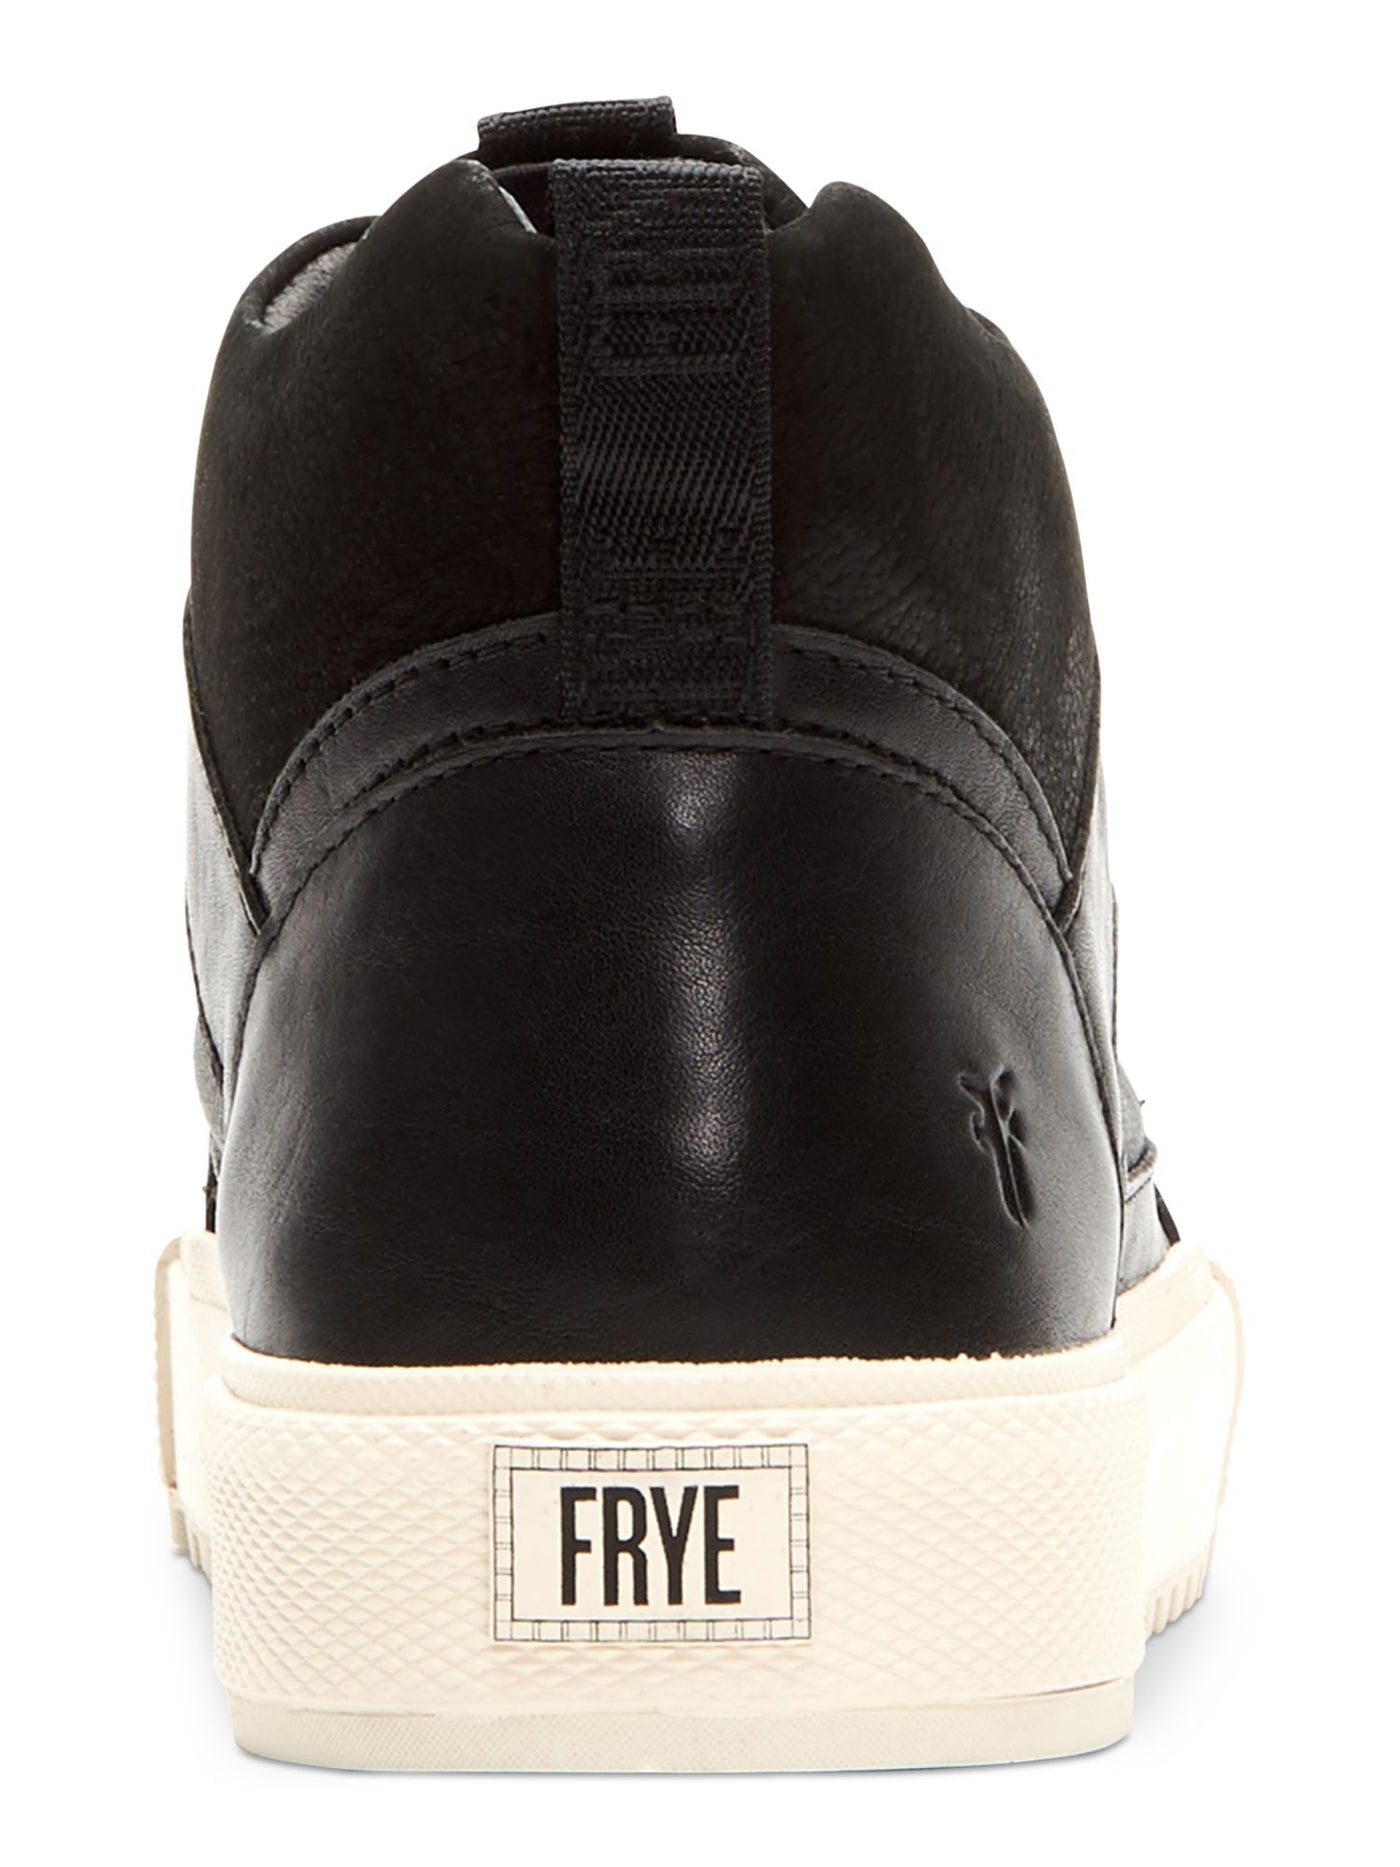 FRYE Womens Black Lug Sole Comfort Gia Round Toe Platform Lace-Up Athletic Sneakers Shoes 7.5 M